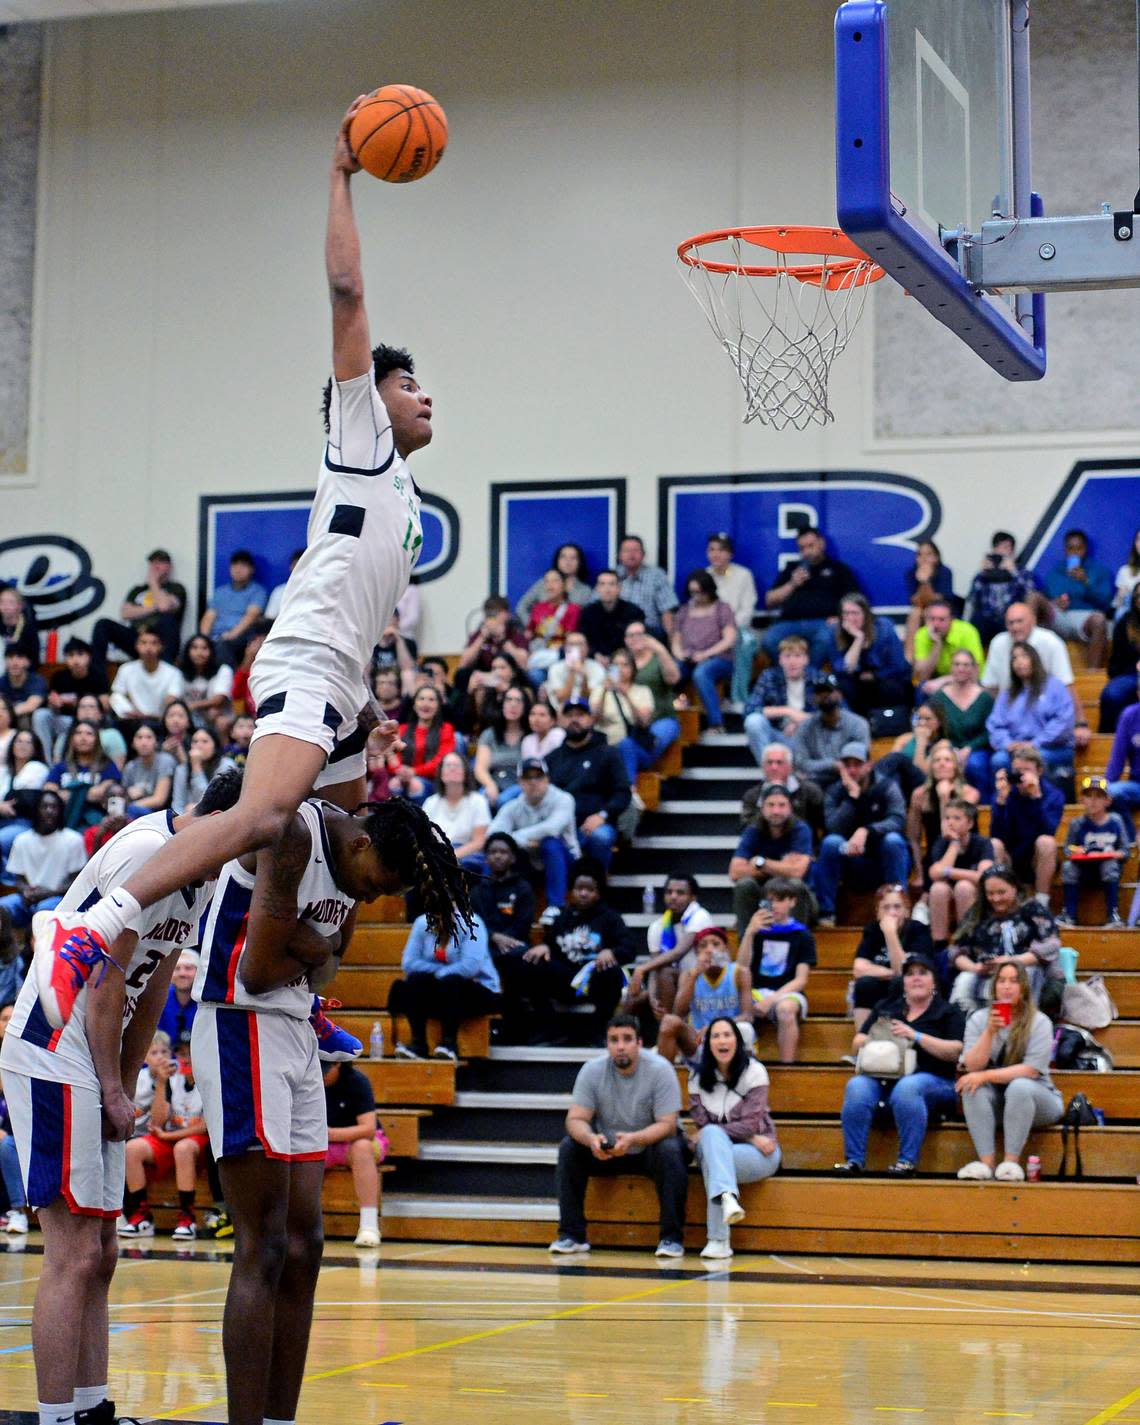 St. Marys Cayden Ward jumps over Modesto Christians Drevon Johnson and Armon Naweed during the Slam Dunk Contest during the 27th Annual Six County All Star Senior Basketball Classic Boys game at Modesto Junior College in Modesto California on April 27, 2024. Ward won the Slam Dunk Contest. John Westberg